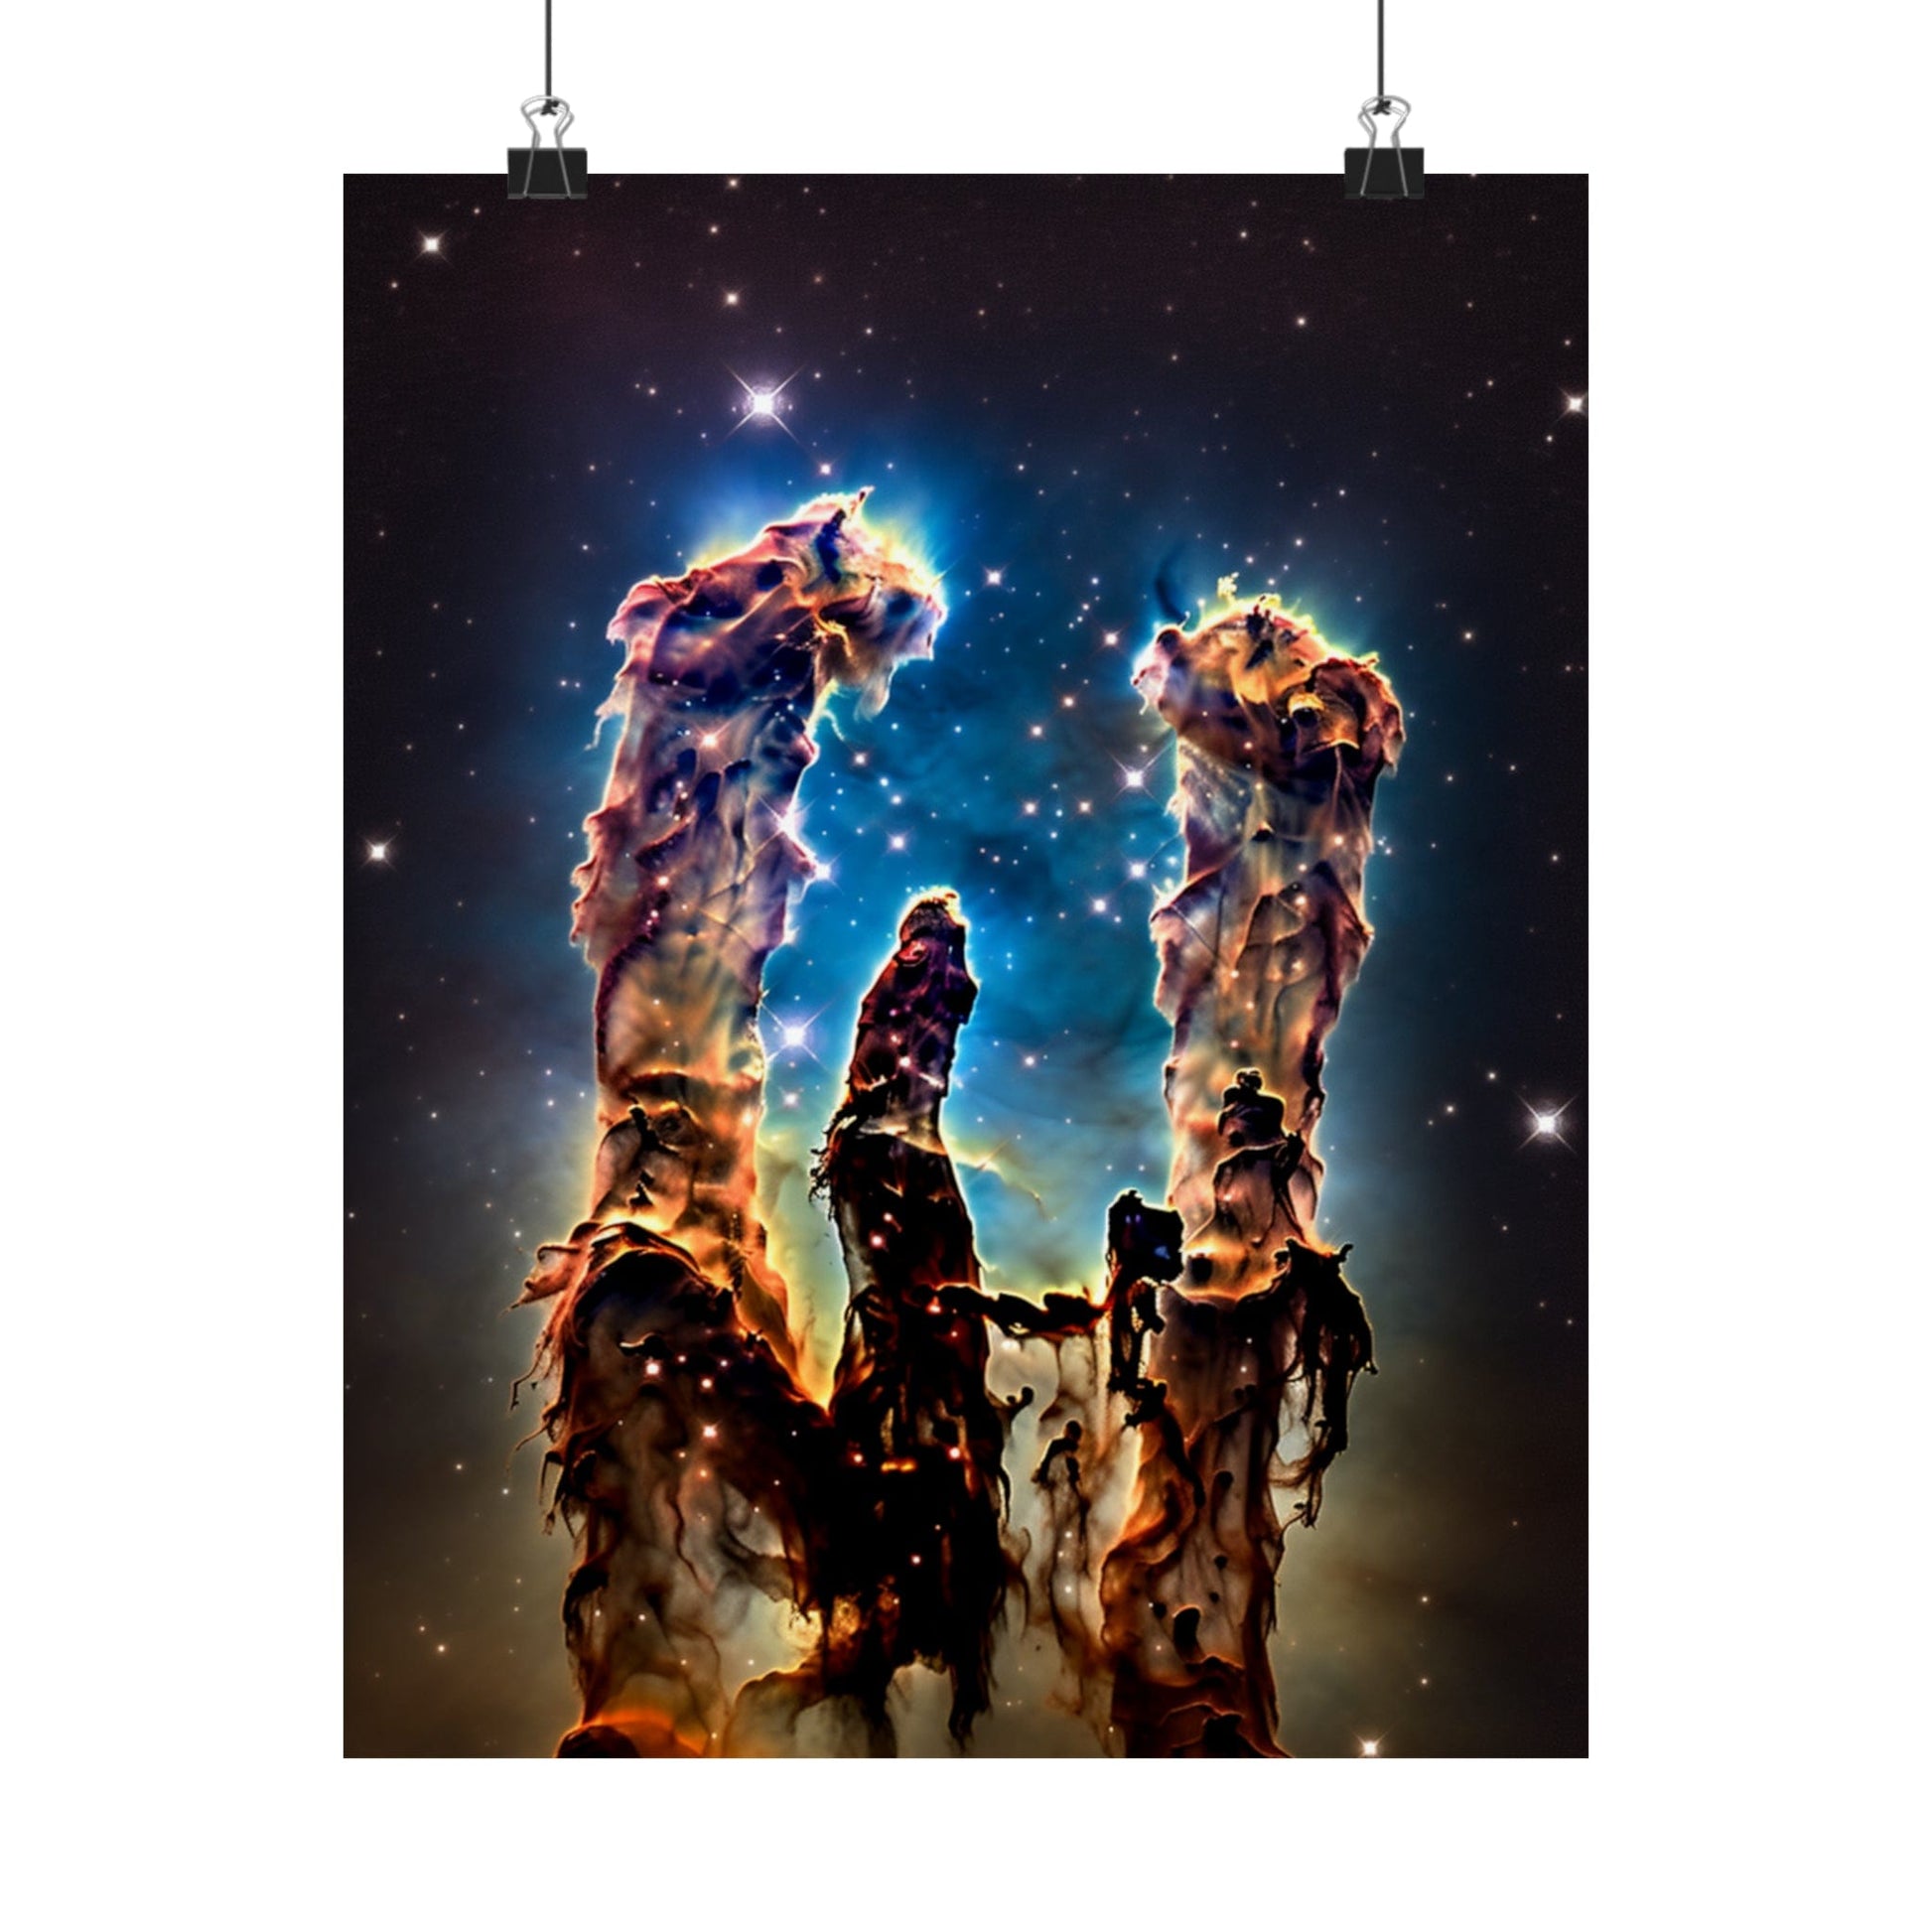 Poster 11″ x 14″ / Matte Pillars Of Creations Posters